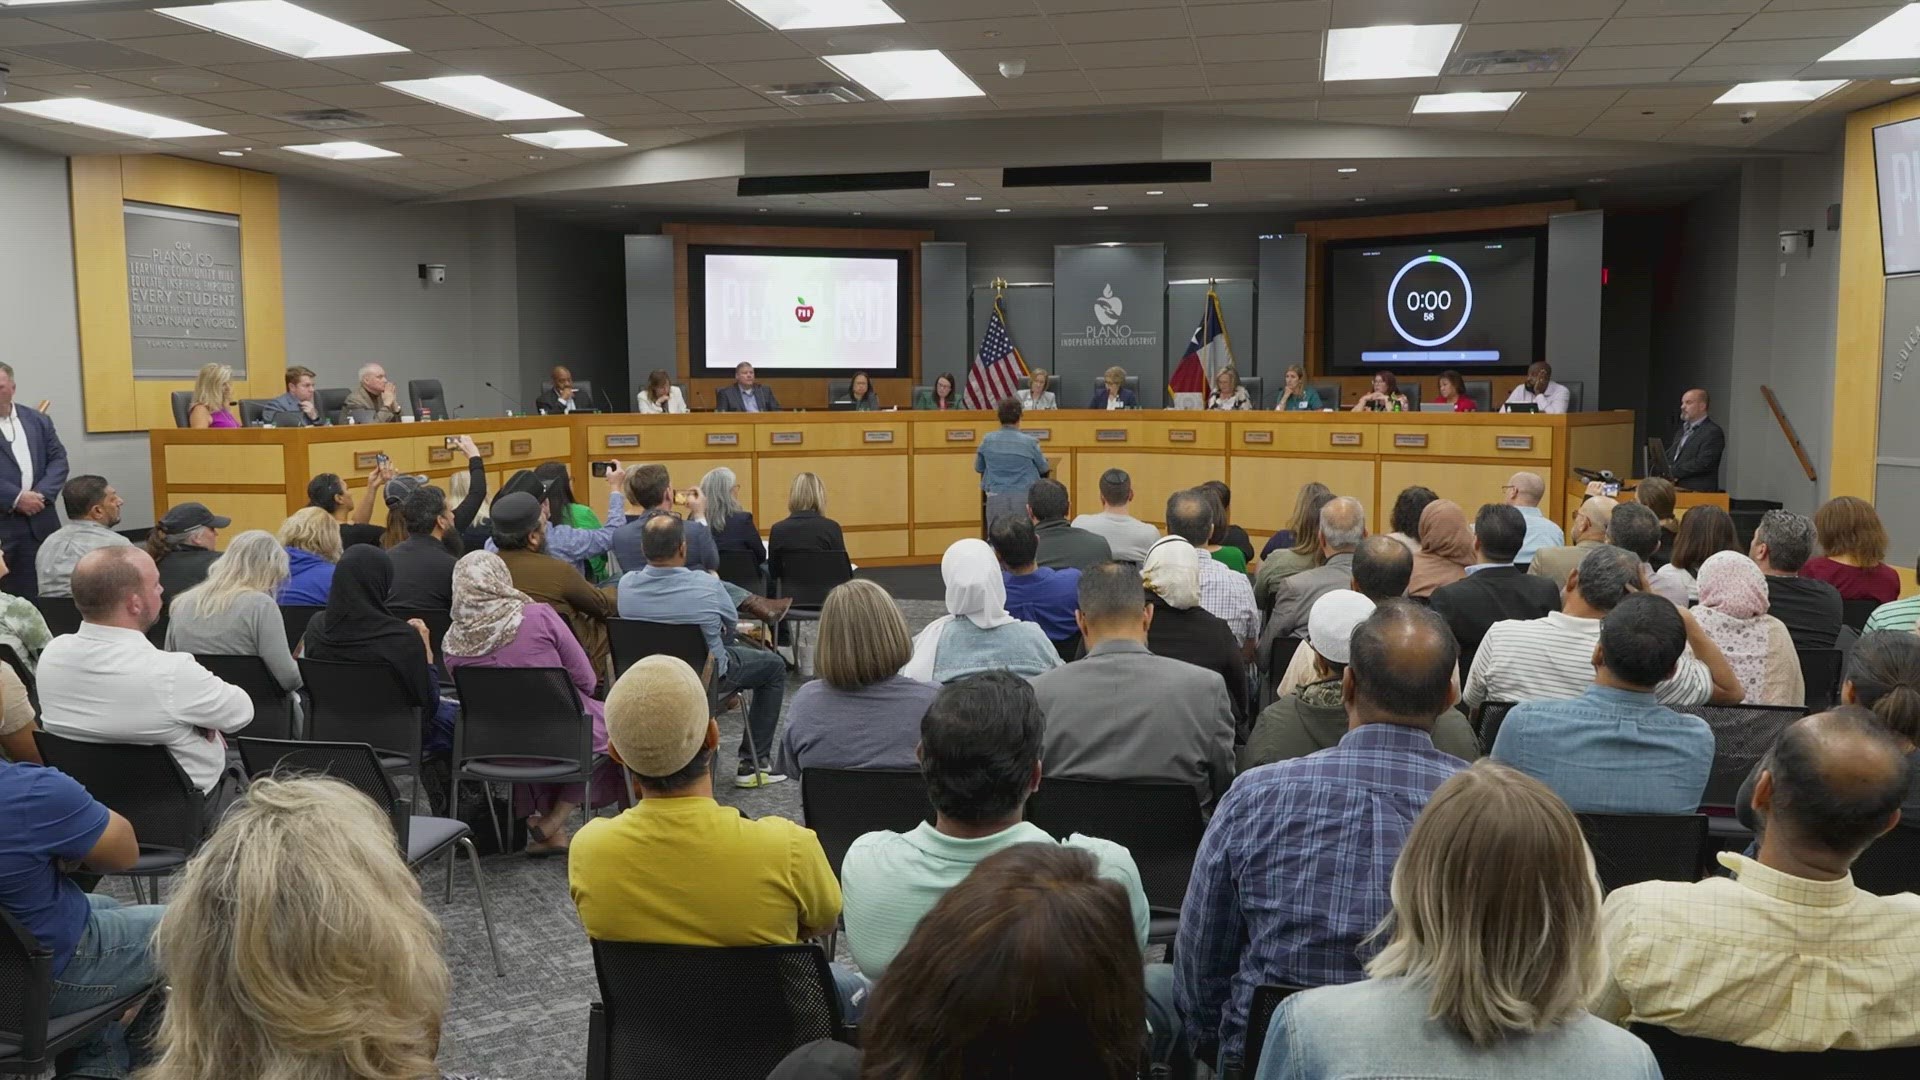 Sexually explicit books were not on the Plano ISD agenda, but that didn't stop another packed boardroom with nearly 30 speakers on the topic.